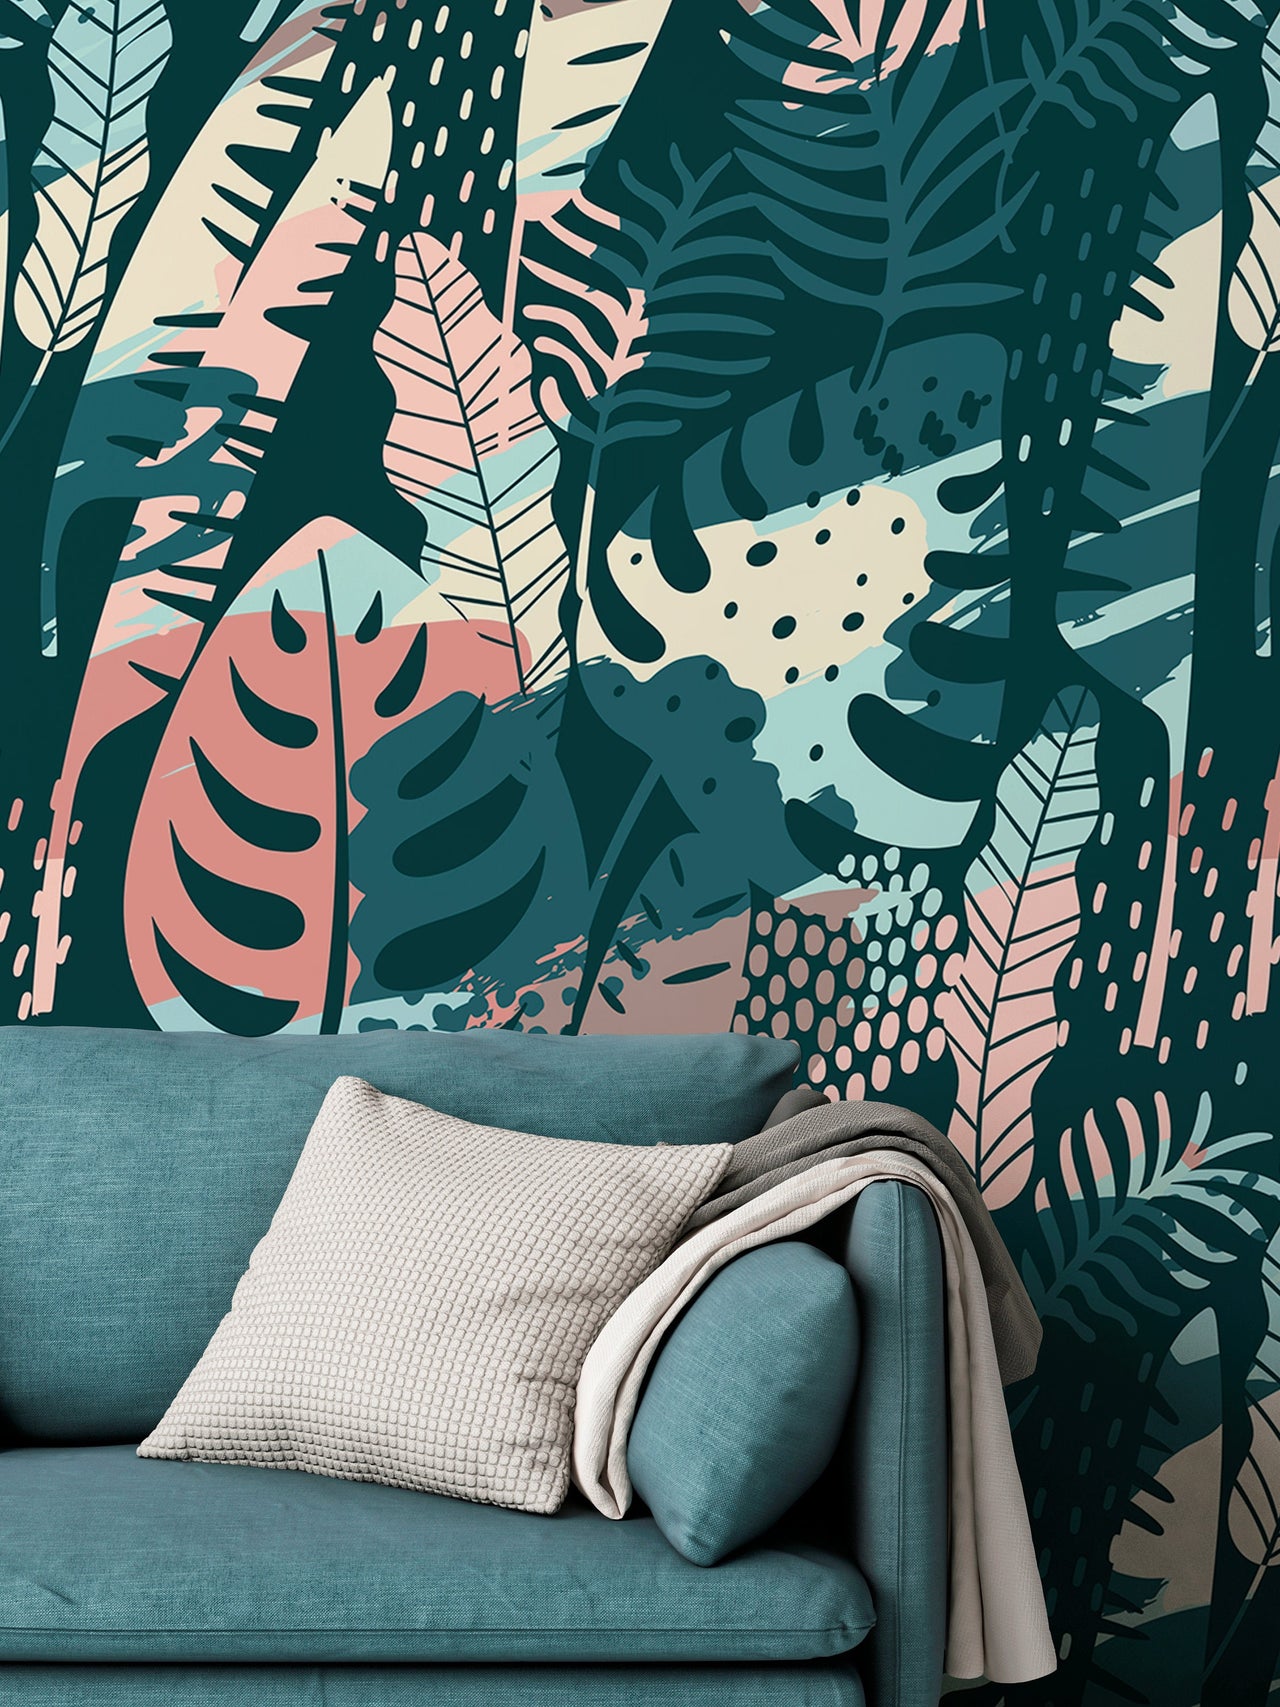 Wallpaper Peel and Stick Wallpaper Removable Wallpaper Home Decor Wall Decor Room Decor / Tropical Abstract Monstera Leaf Wallpaper - A832